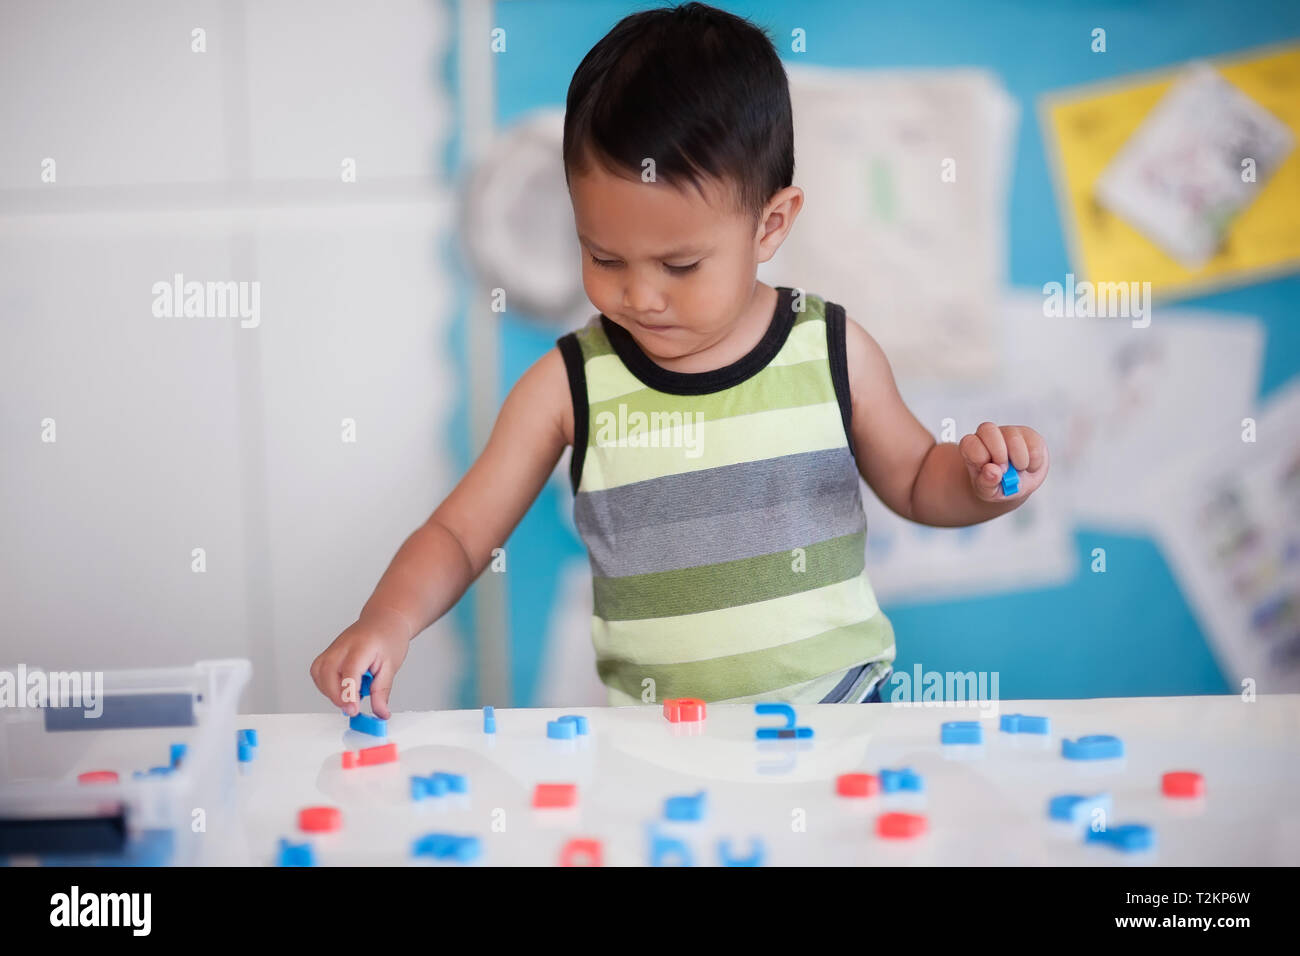 A smart young boy manipulating alphabet letters to form words in kindergarten room. Stock Photo